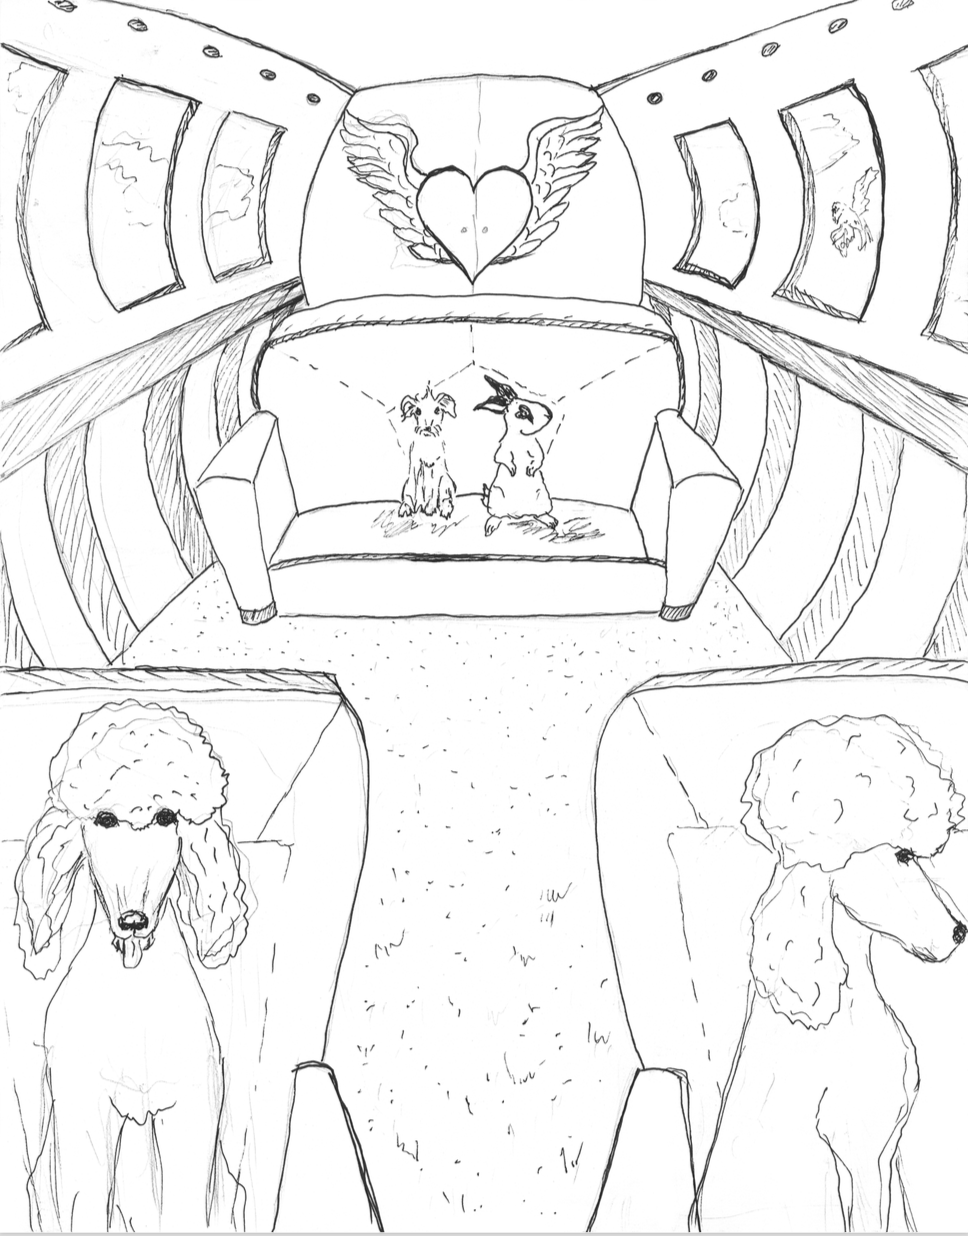 coloring-book-page-17.png